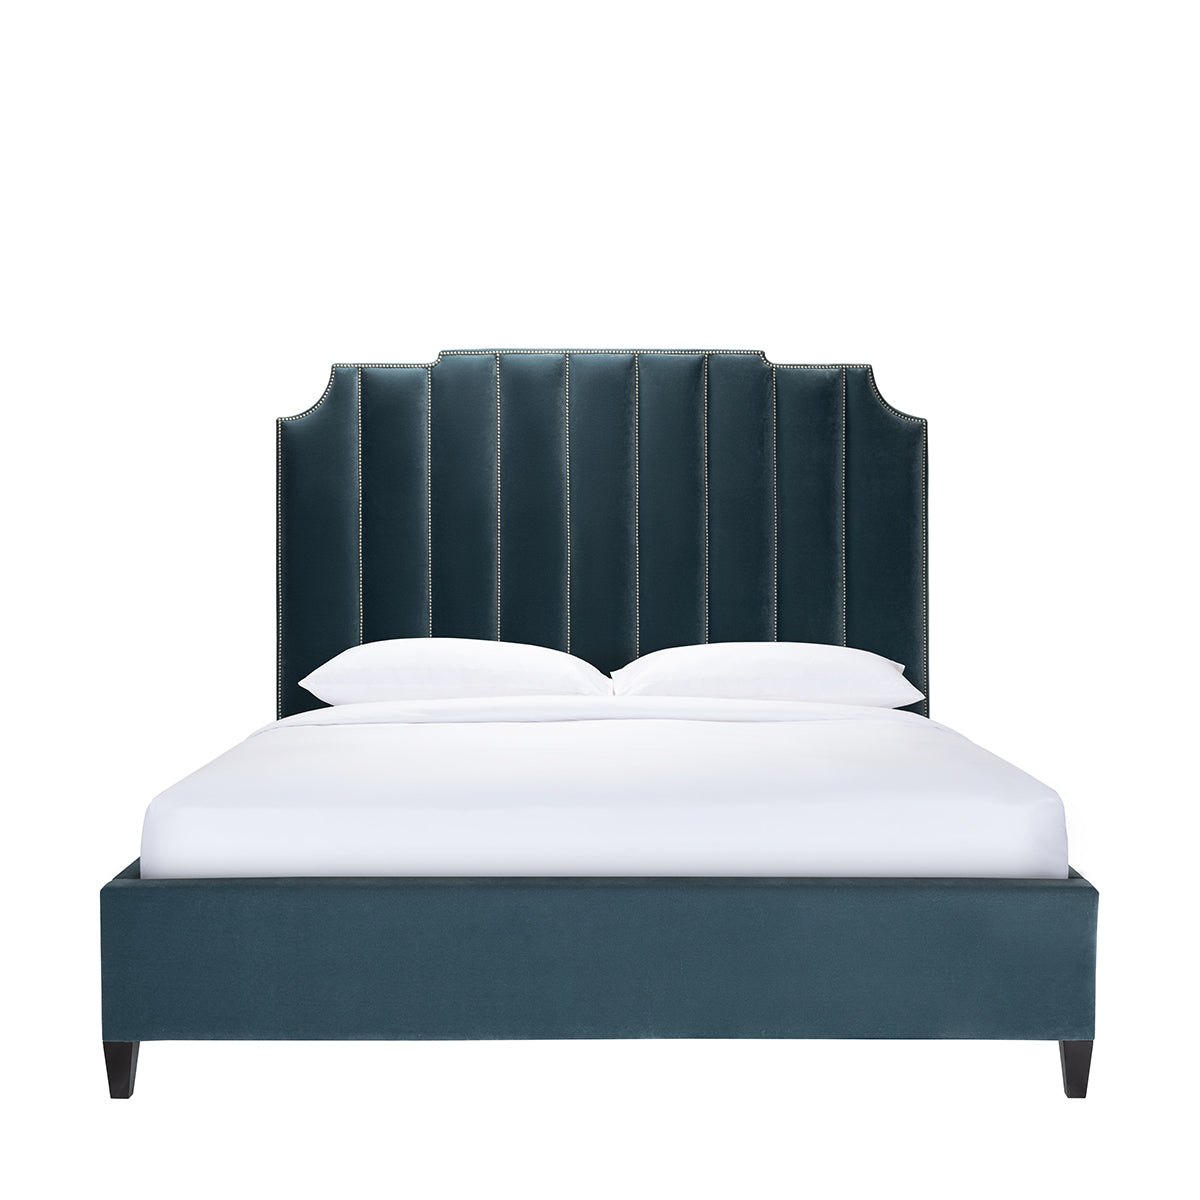 BAYONNE UPHOLSTERED KING BED